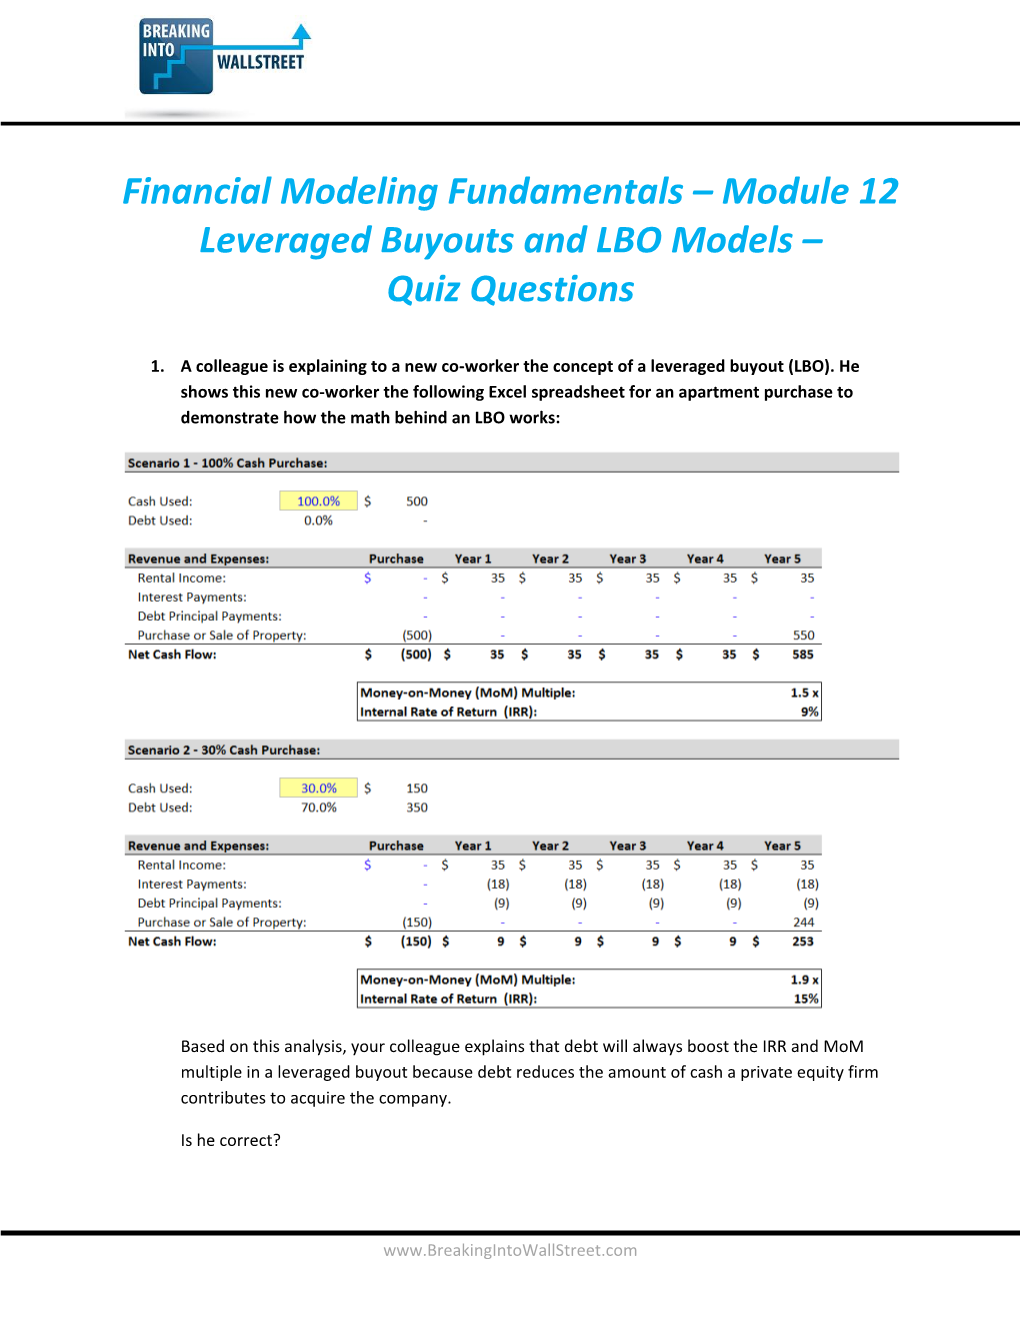 Financial Modeling Fundamentals – Module 12 Leveraged Buyouts and LBO Models – Quiz Questions